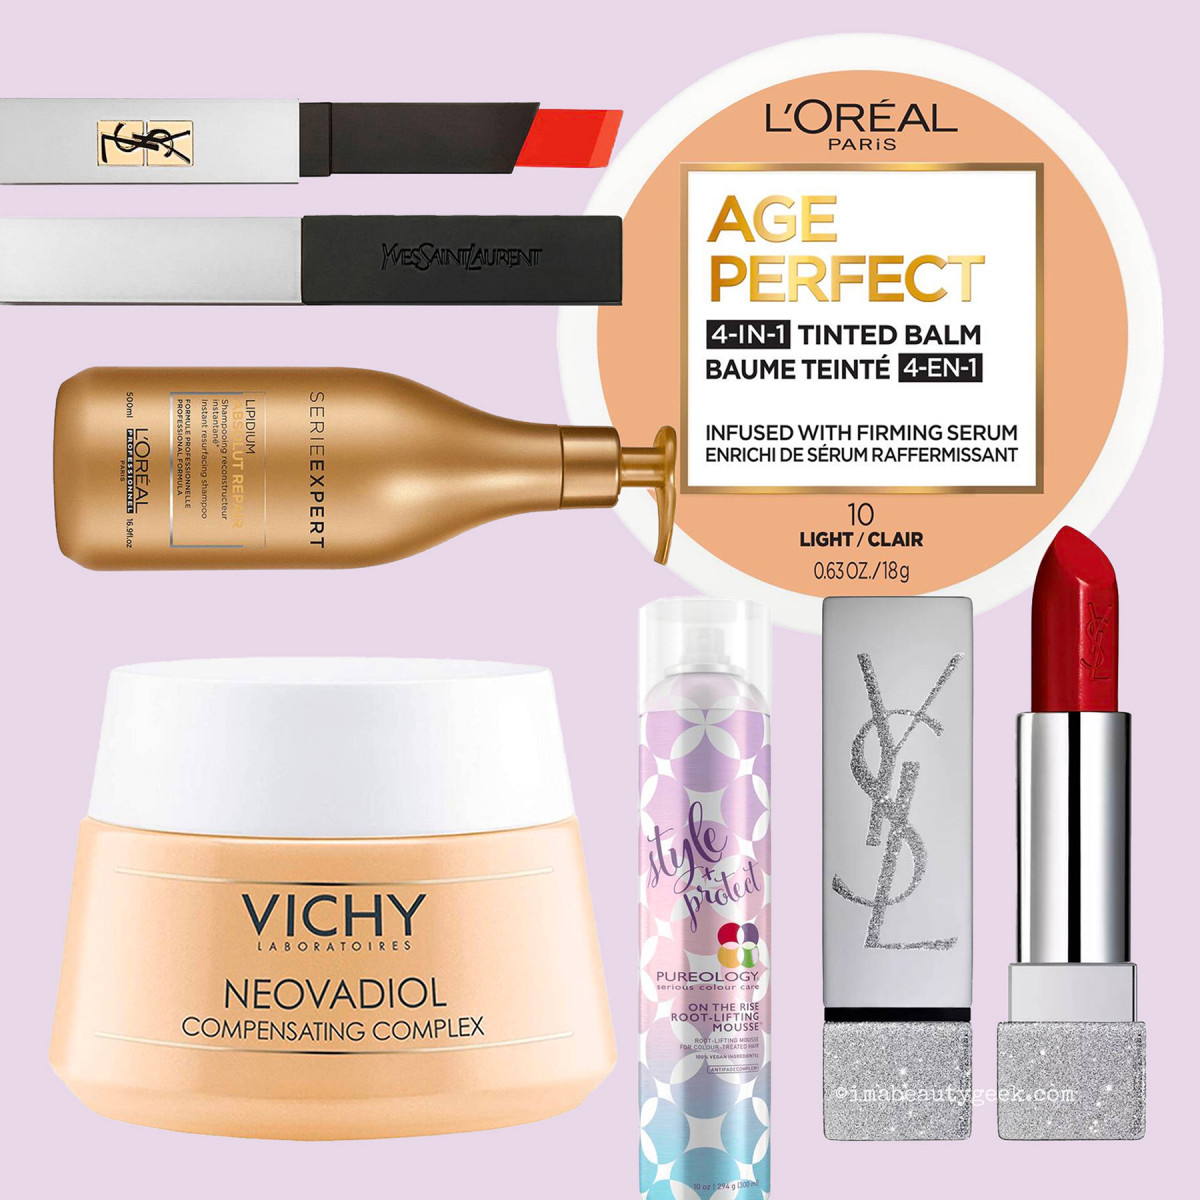 L'Oreal brands on lorealbeautyoutlet.ca include Yves Saint Laurent Beauty, Vichy, Pureology, L'Oreal Professionnel and L'Oreal Paris, to name a few.